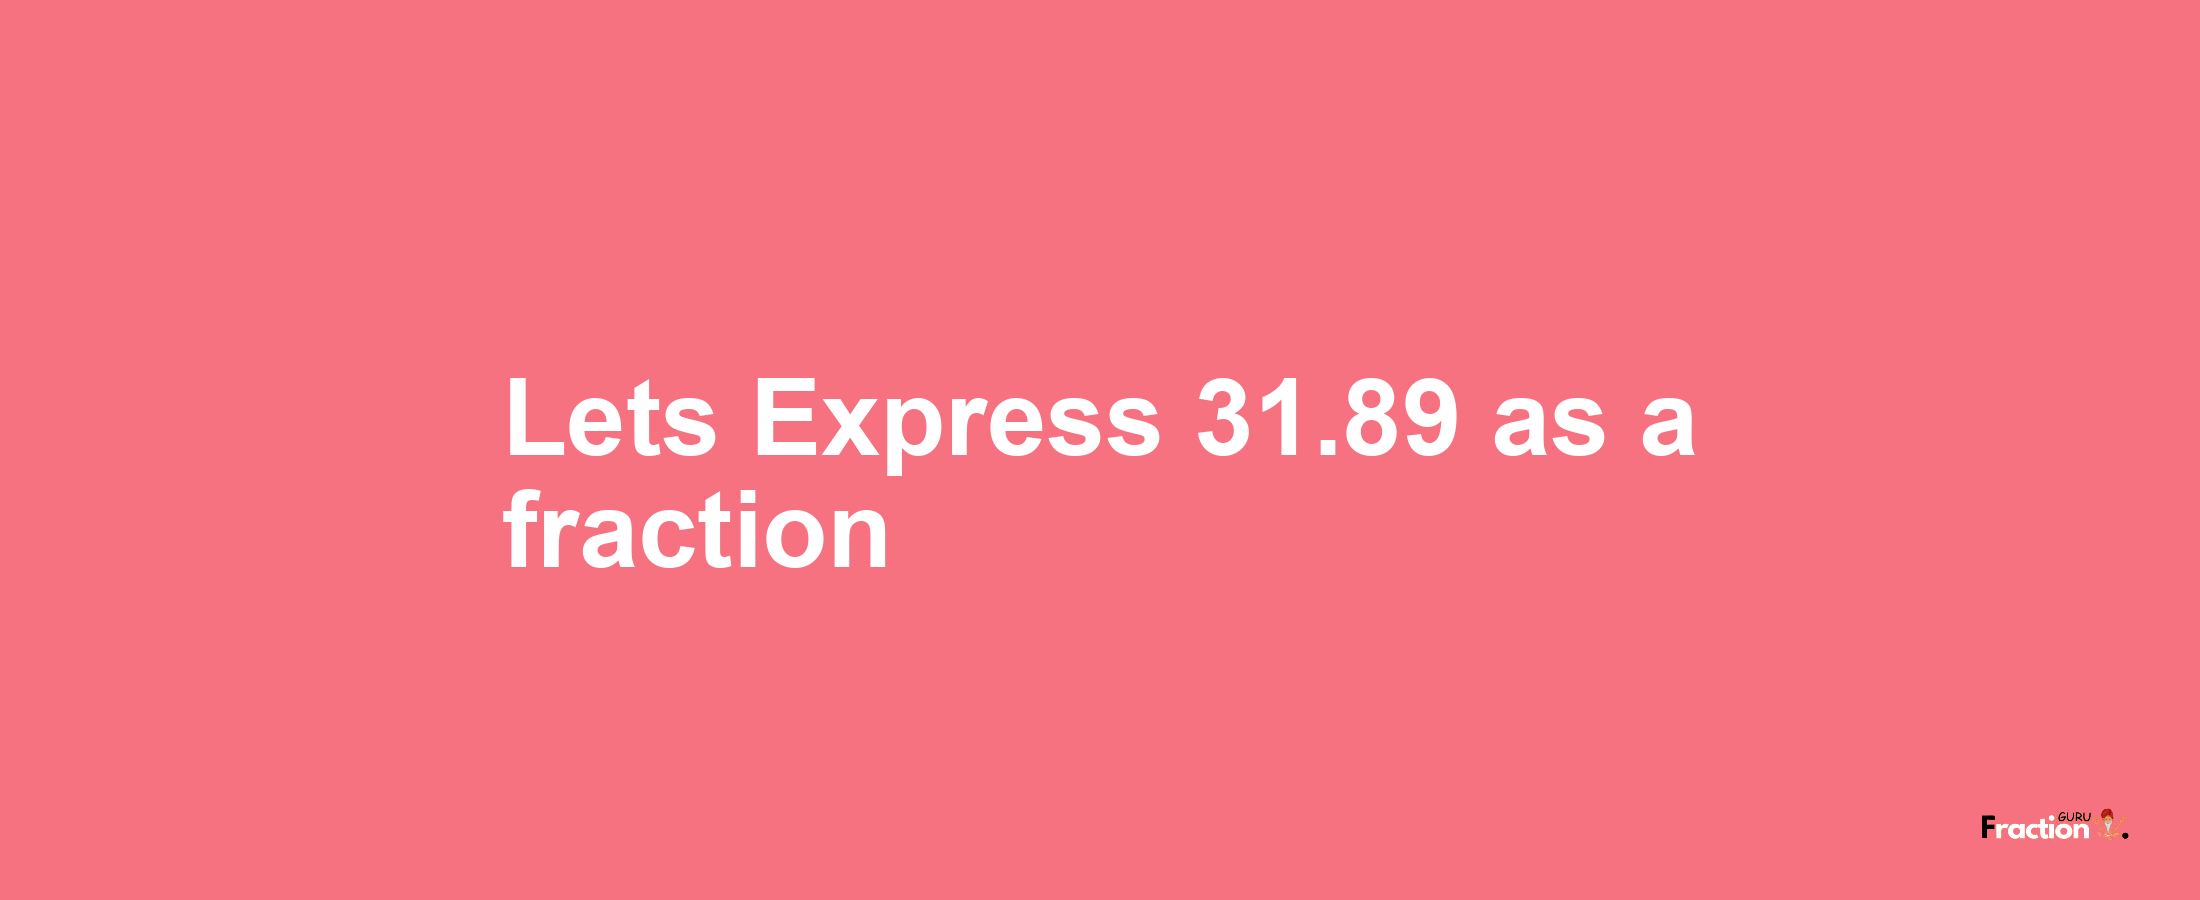 Lets Express 31.89 as afraction